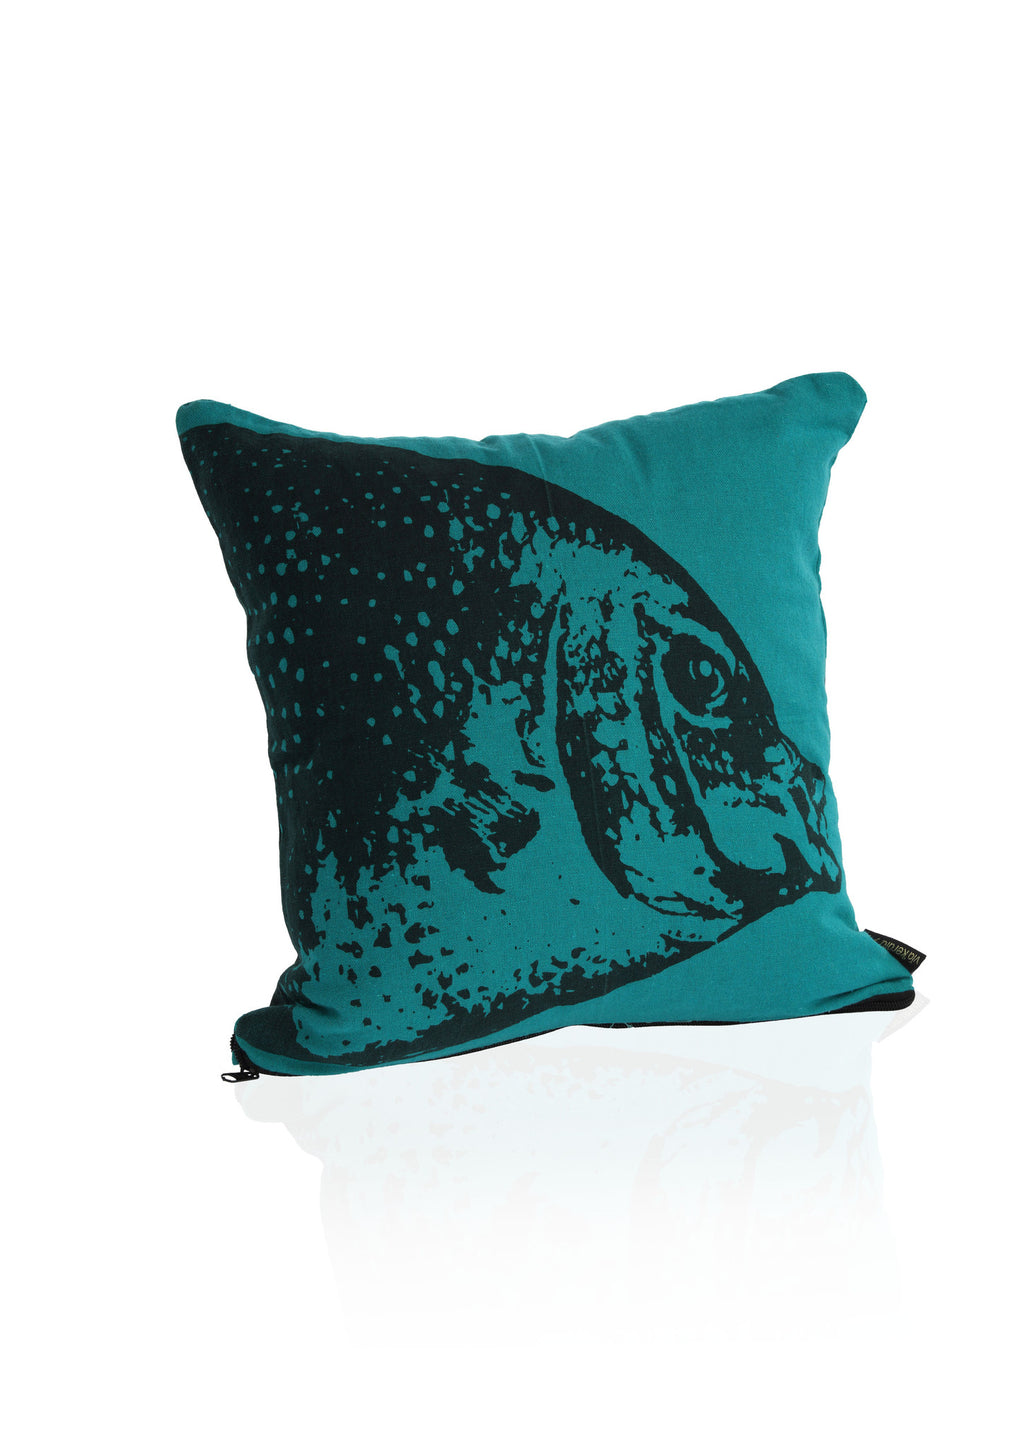 Heads or Tails - Fish Cushion Cover - Marine Green